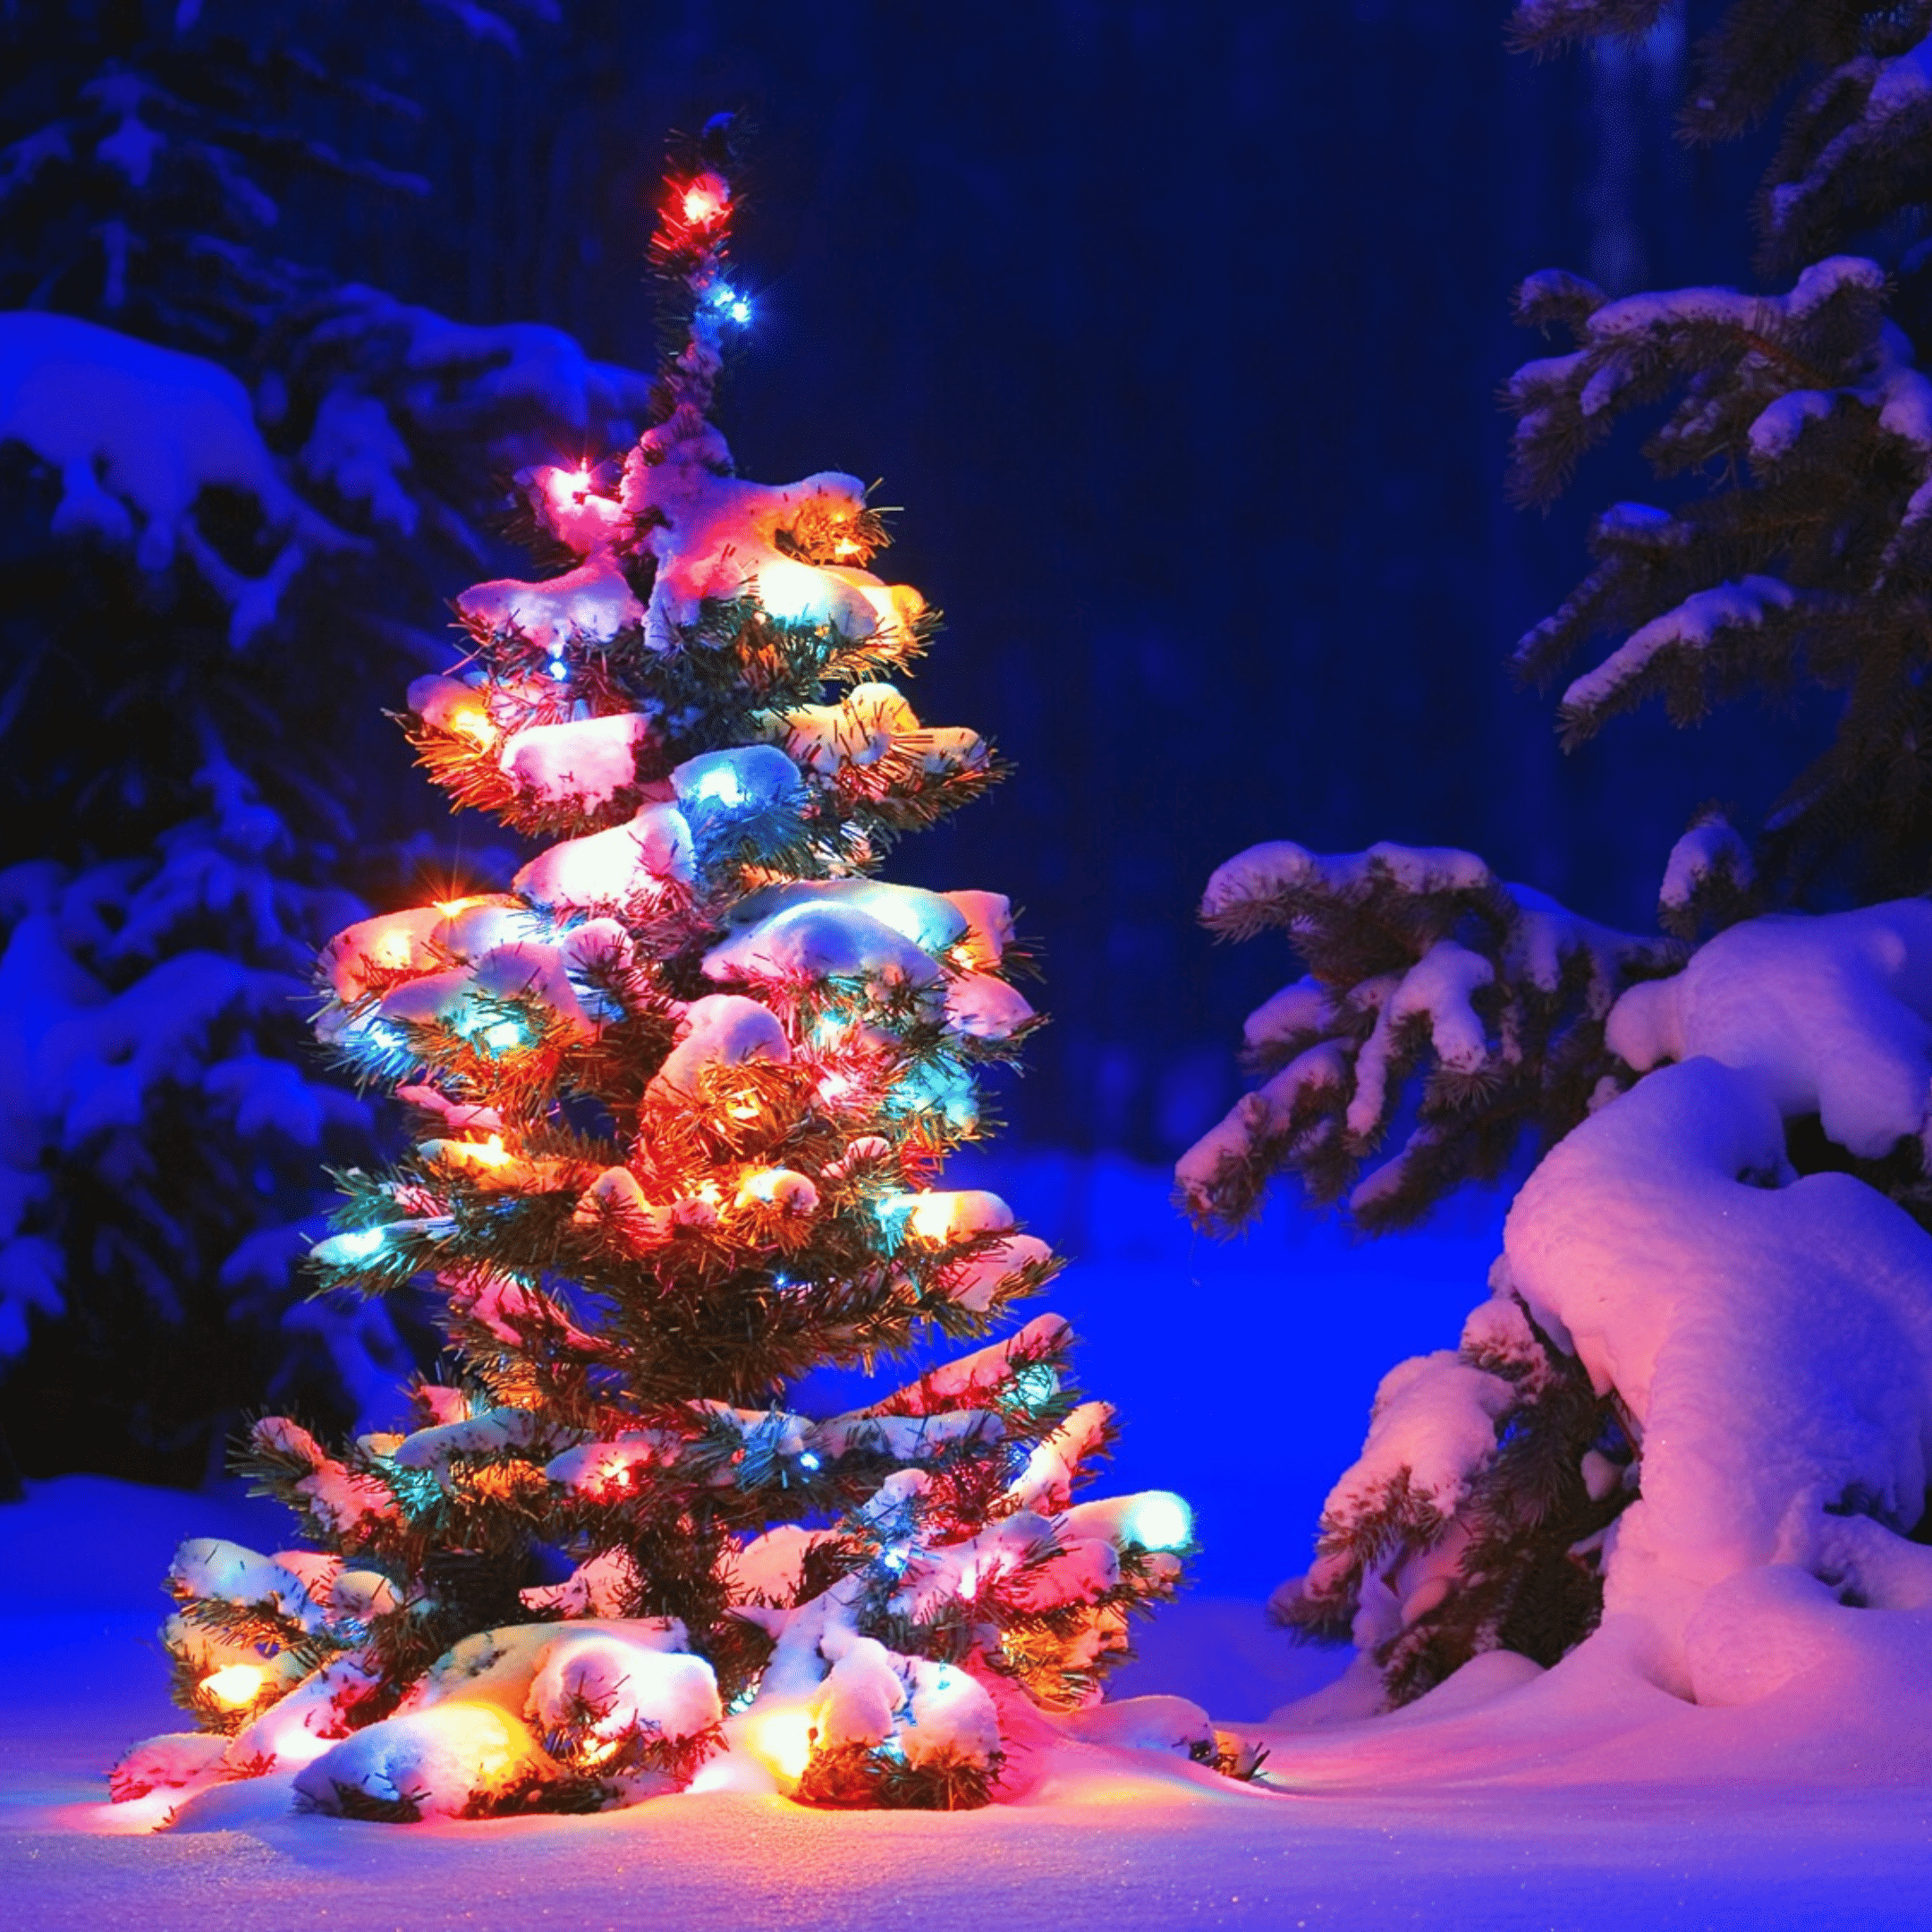 snowy Chiristmas tree with colored lihts